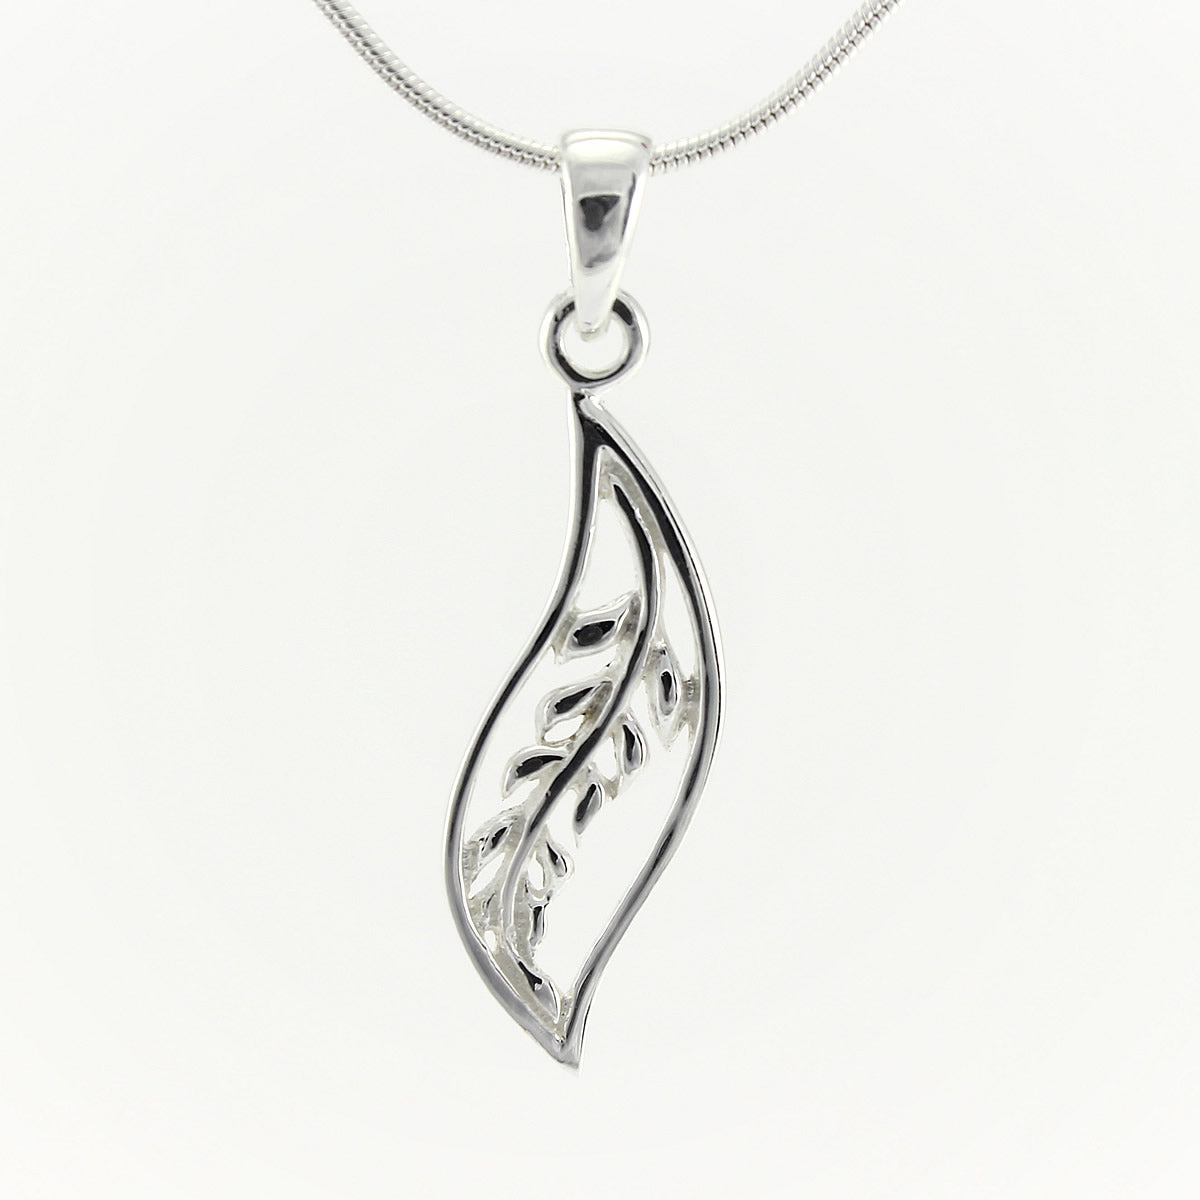 SWN135 Sterling Silver Pendant Necklace